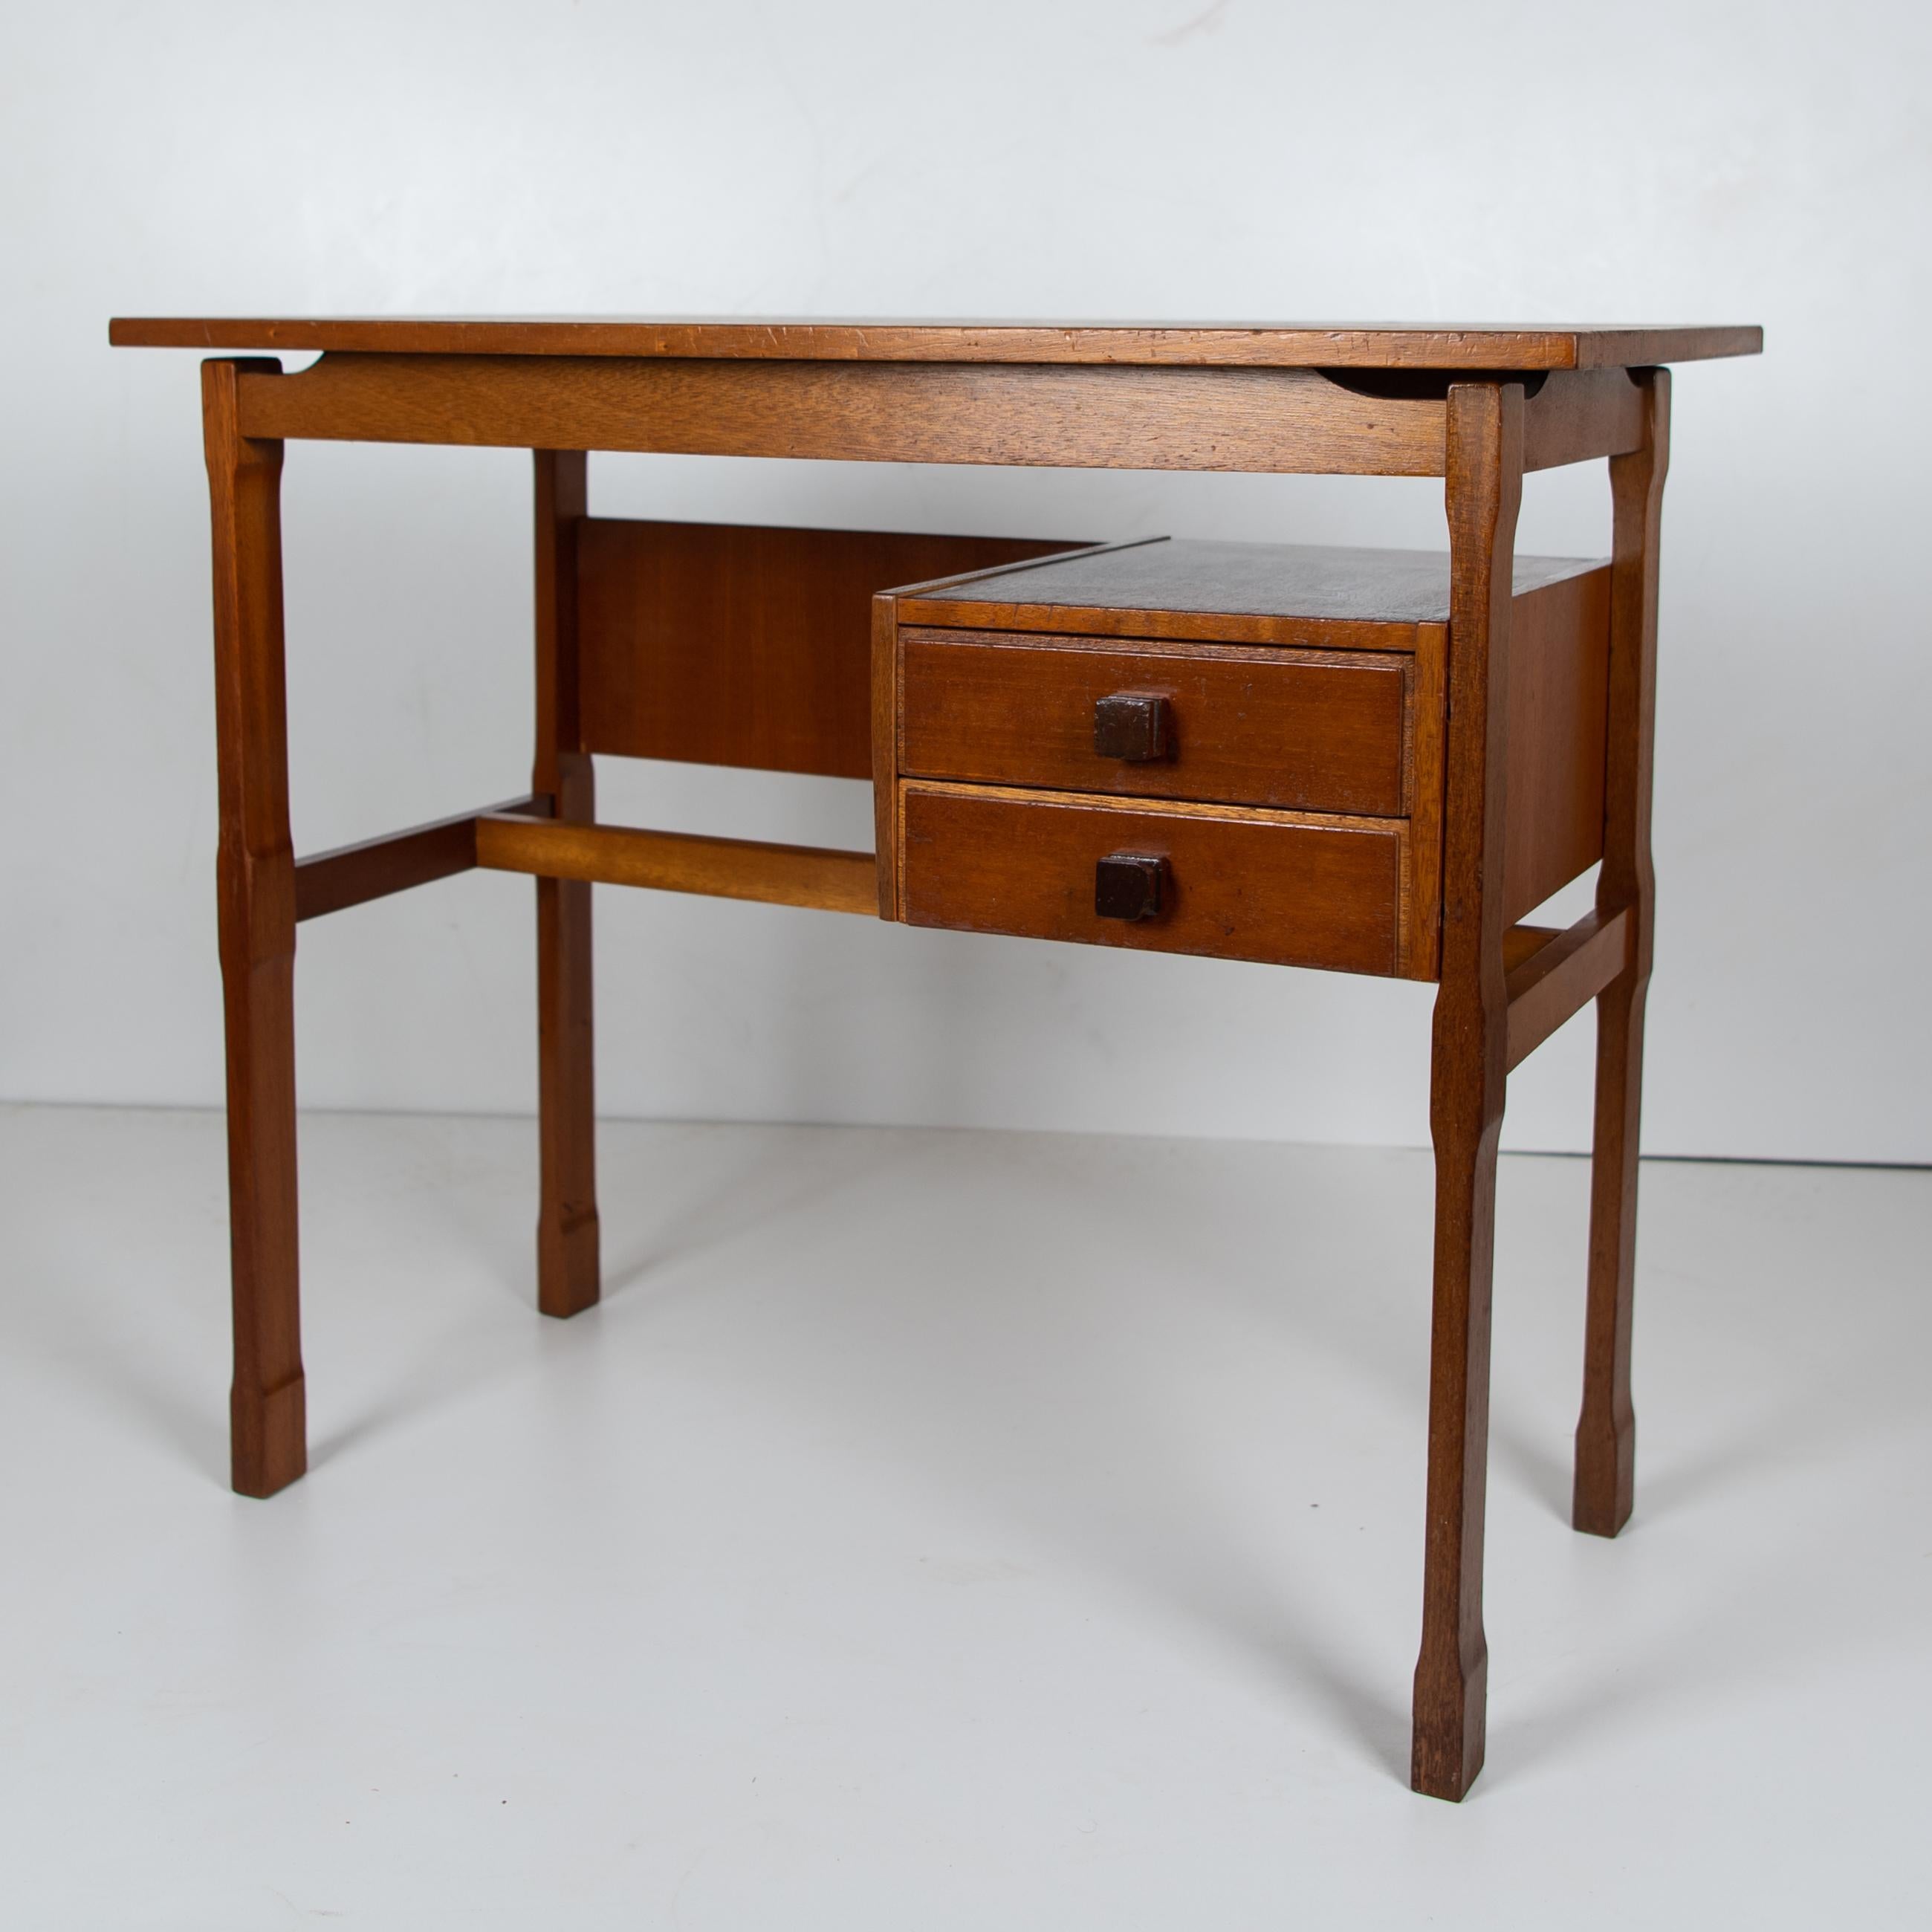 Vintage desk.
Cozy 1950s vintage desk table in scandinavian style with two wood drawers on the side. Ideal for small spaces. The item has been renovated and major damages have been repaired. Drawers's pommels are also in solid wood.